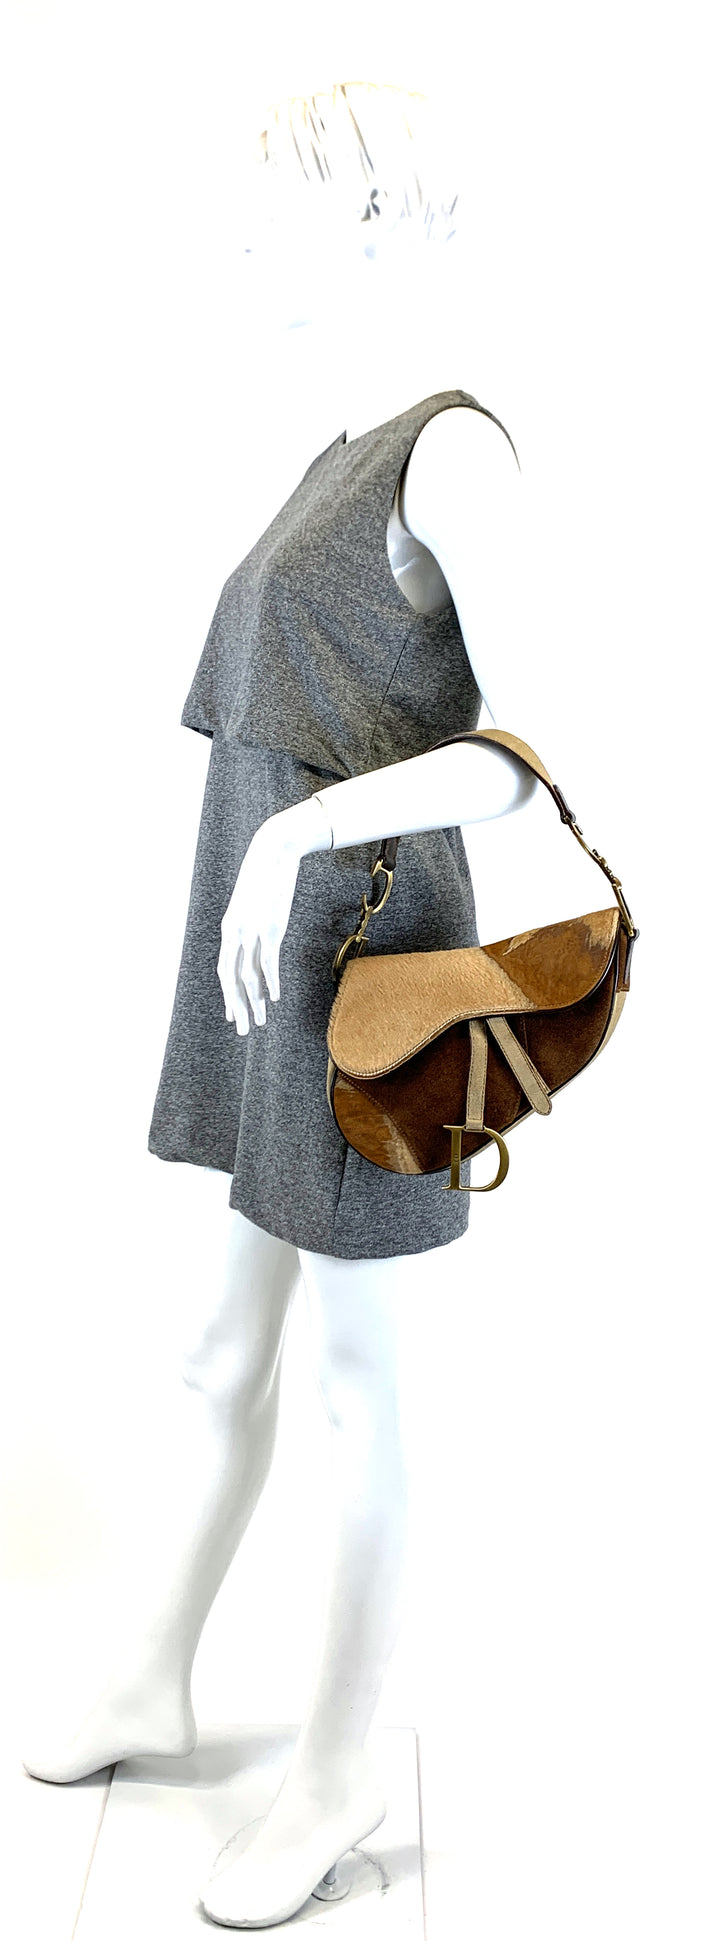 suede saddle small pony hair flap bag